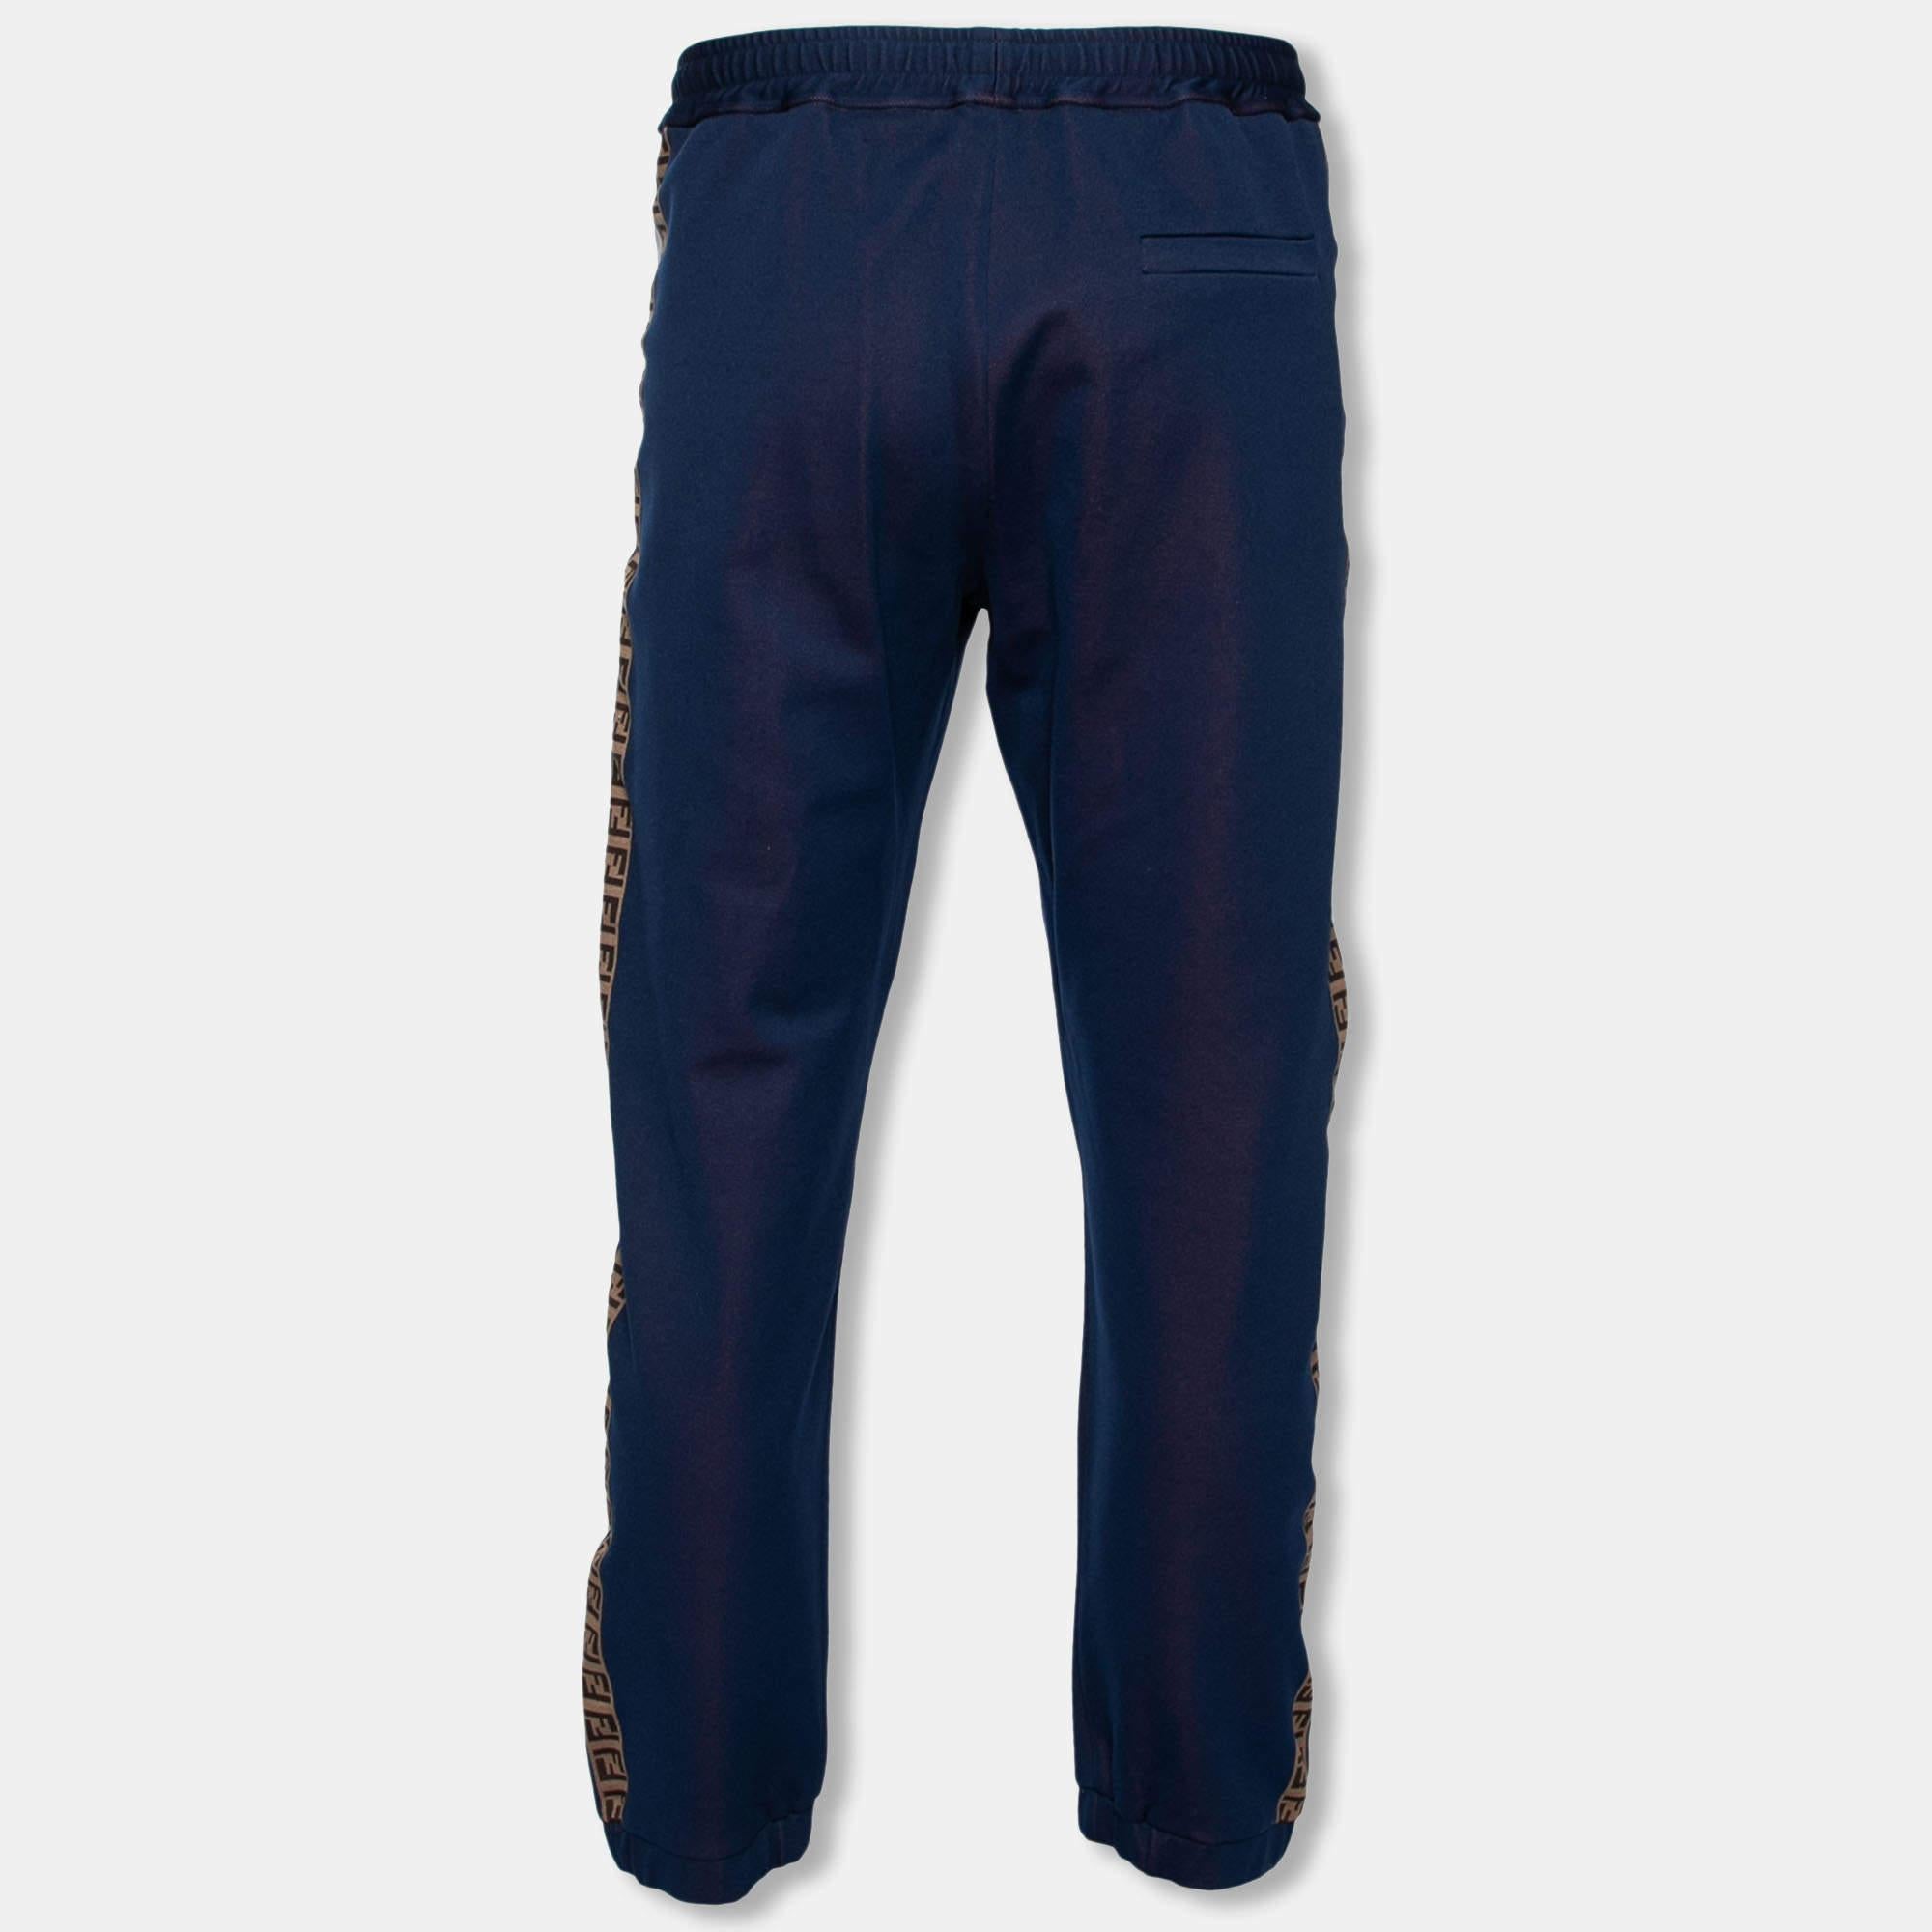 These track pants come from the Fendi x Hey Reilly collaboration and truly showcase artistic craftsmanship. They have a blue shade with logo tape trims on the sides and have been made from a cotton blend. Team them with a simple tee and sneakers.

